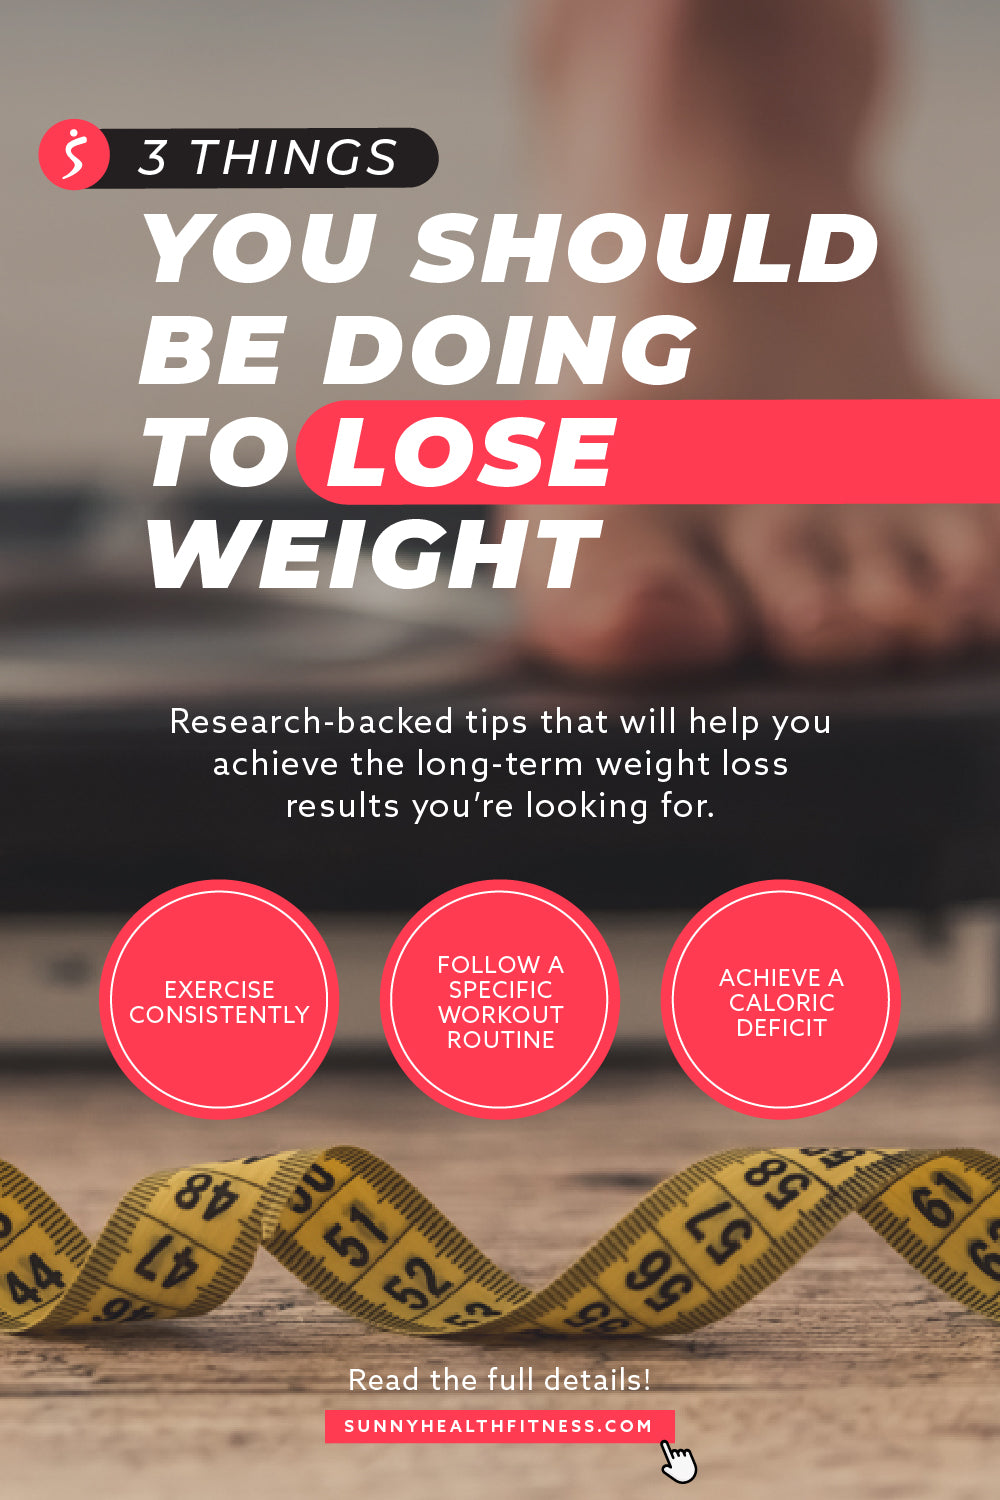 3 Things to Lose Weight Infographic